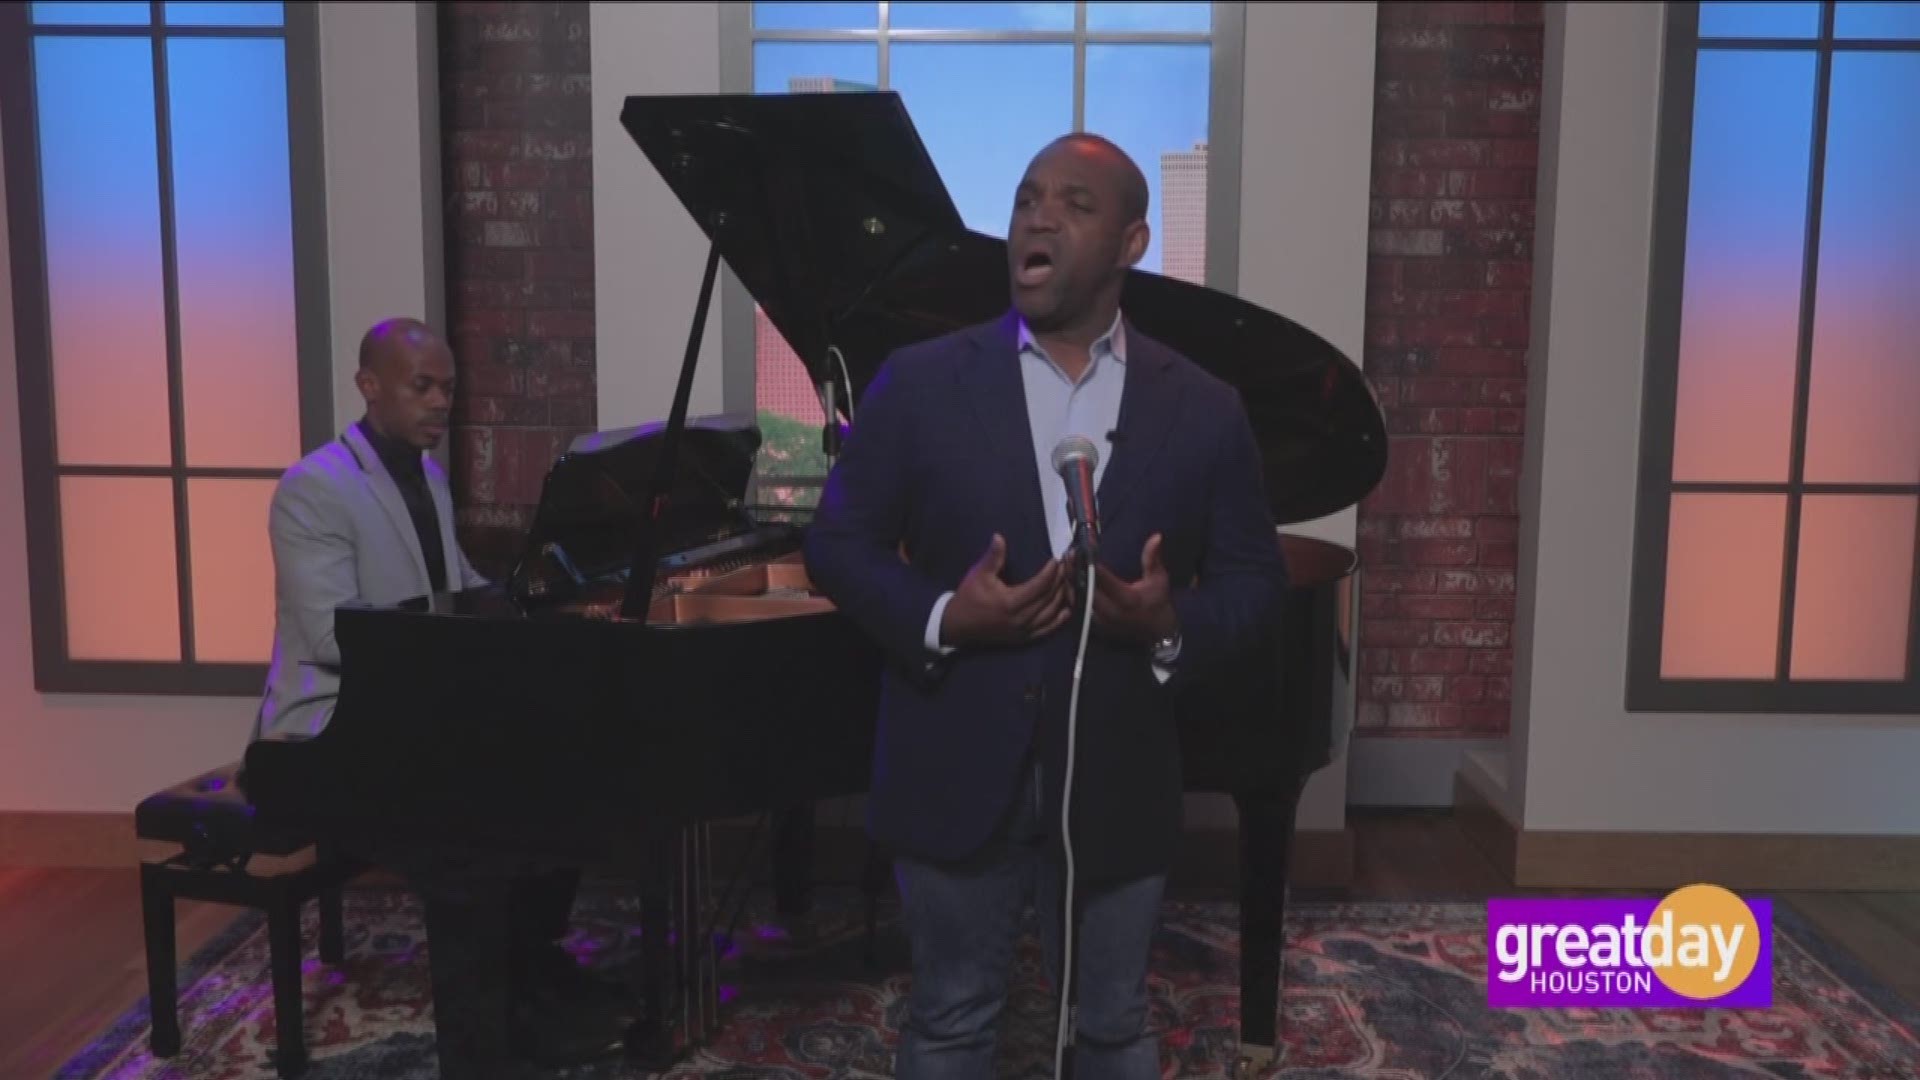 Lawrence Brownlee shared his operatic talents with Great Day Houston.